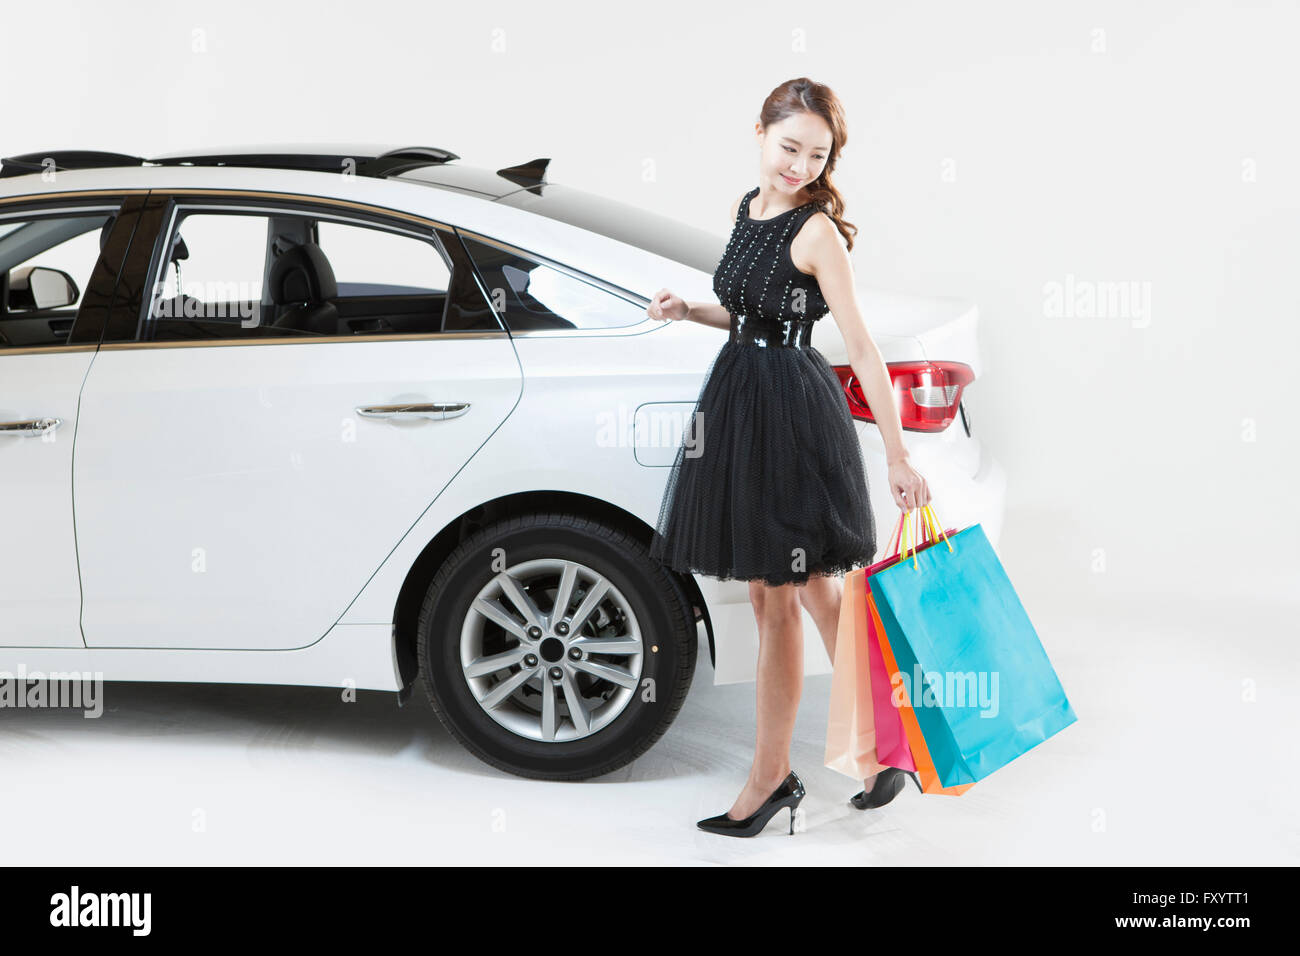 Young smiling woman in dress walking holding shopping bags looking back with a car Stock Photo